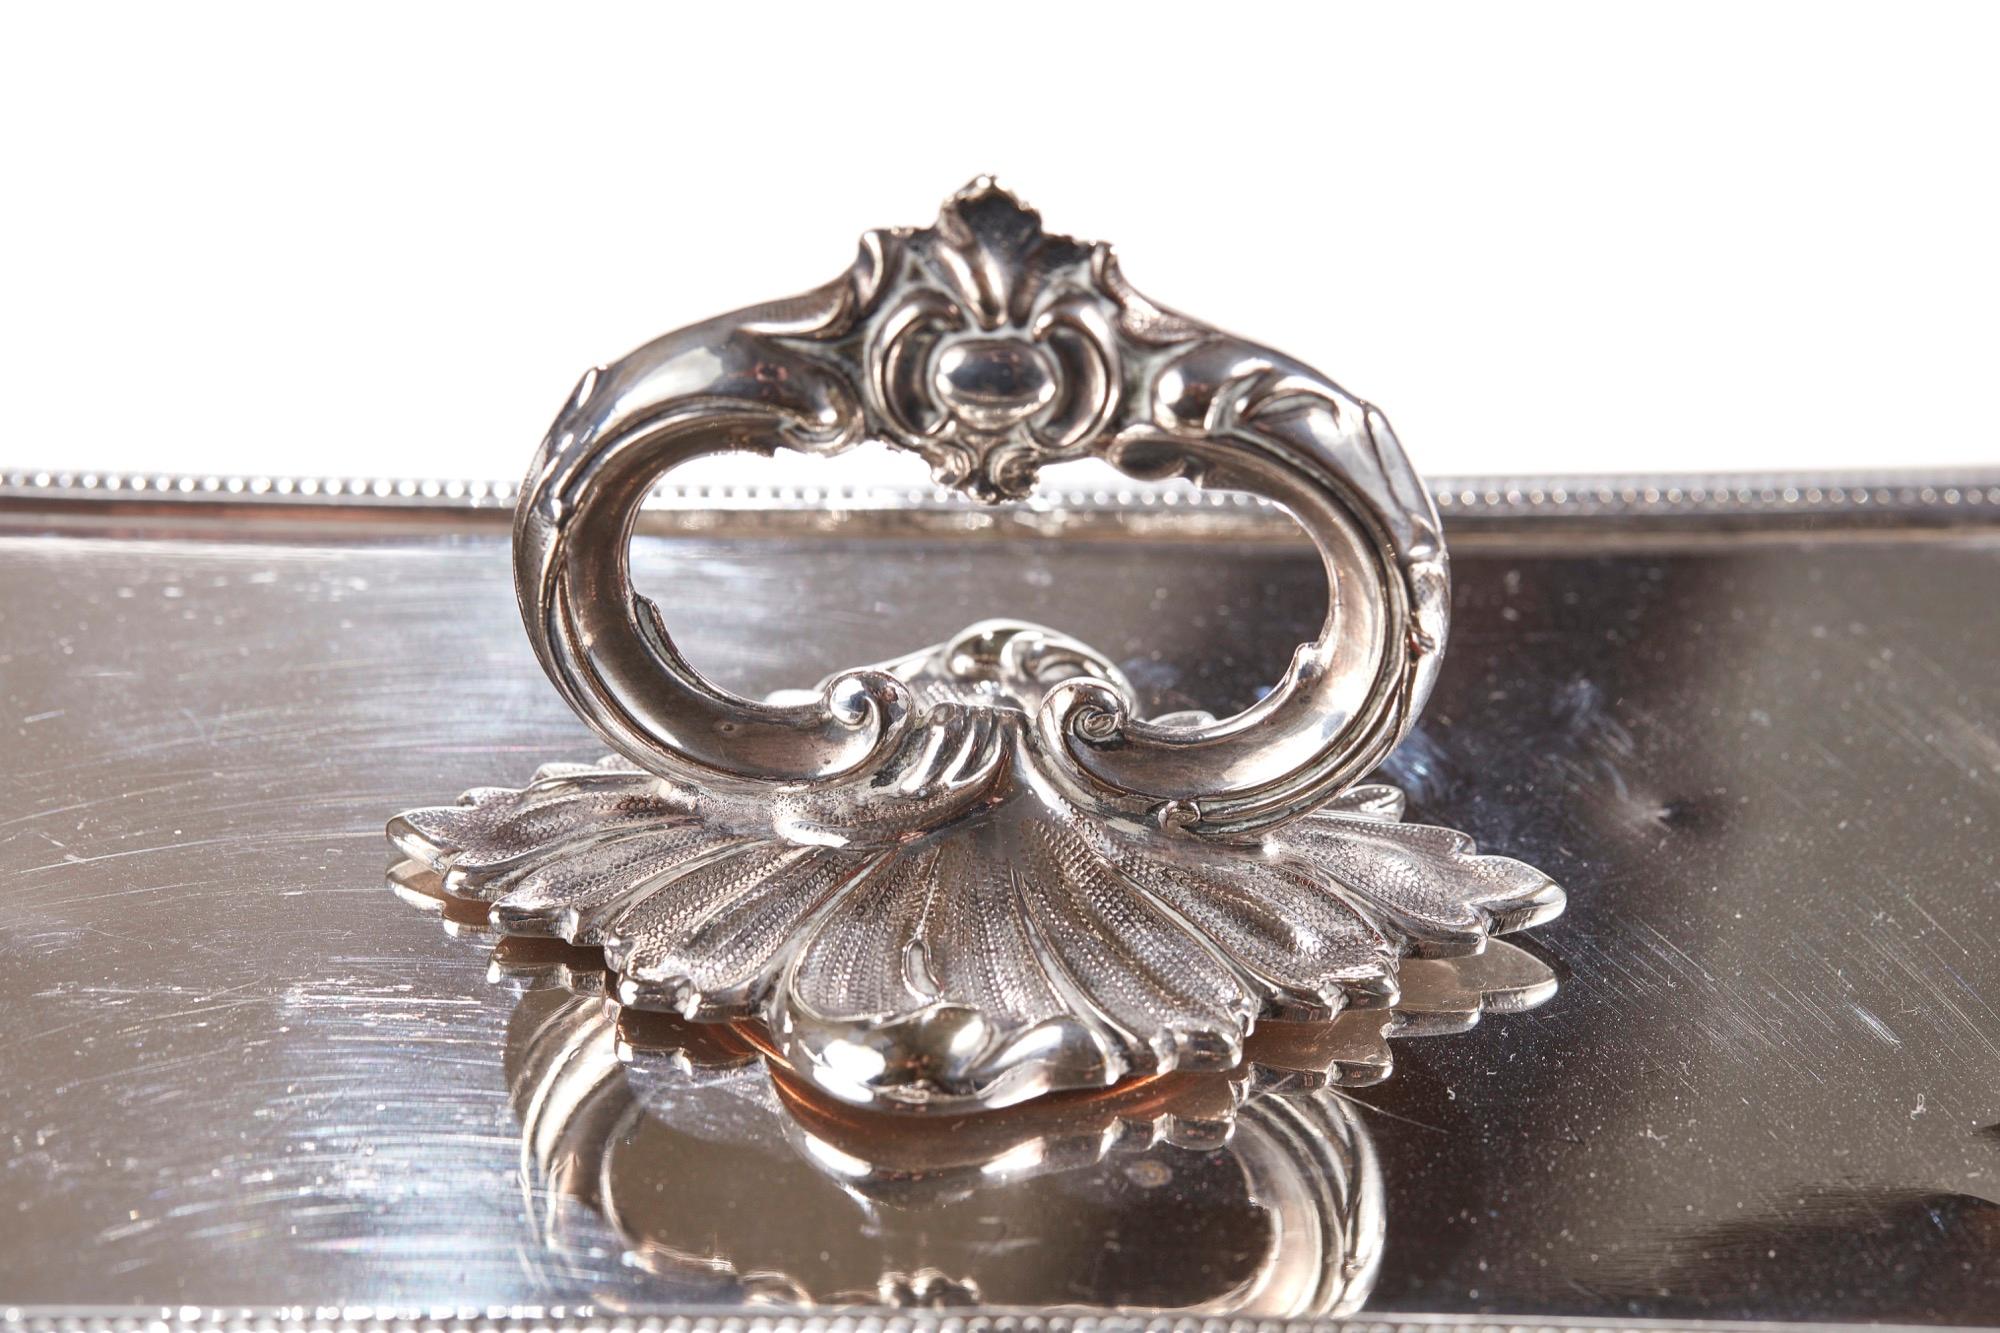 Offered for sale is this 19th century antique silver plated Entree dish which has ornate handles, lift out tray inside standing on ornate feet. Lovely antique condition.